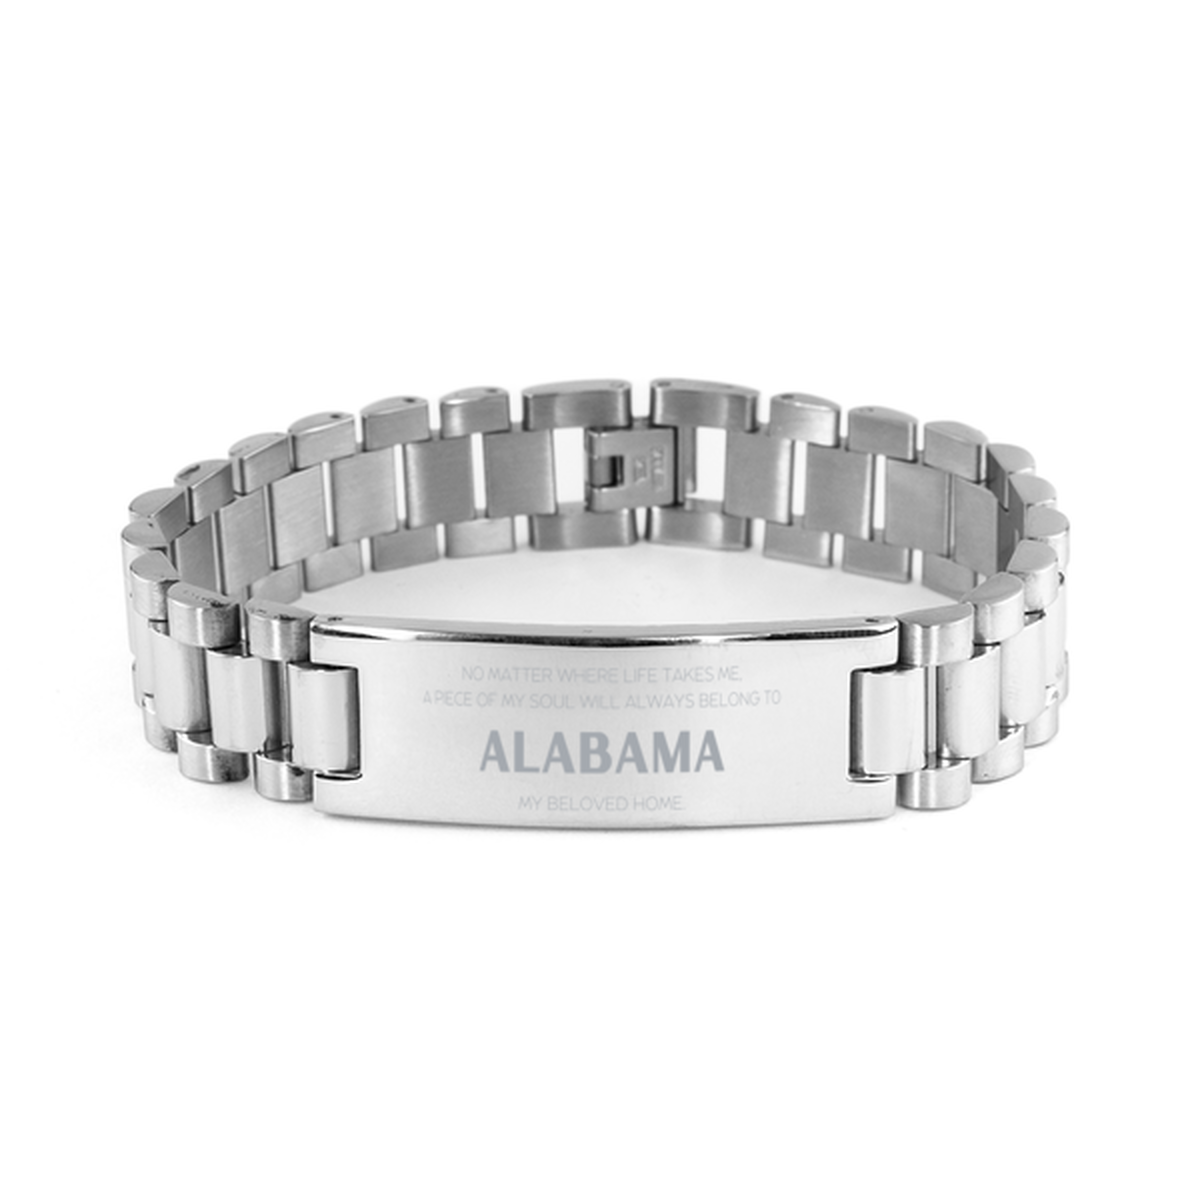 Love Alabama State Gifts, My soul will always belong to Alabama, Proud Ladder Stainless Steel Bracelet, Birthday Unique Gifts For Alabama Men, Women, Friends